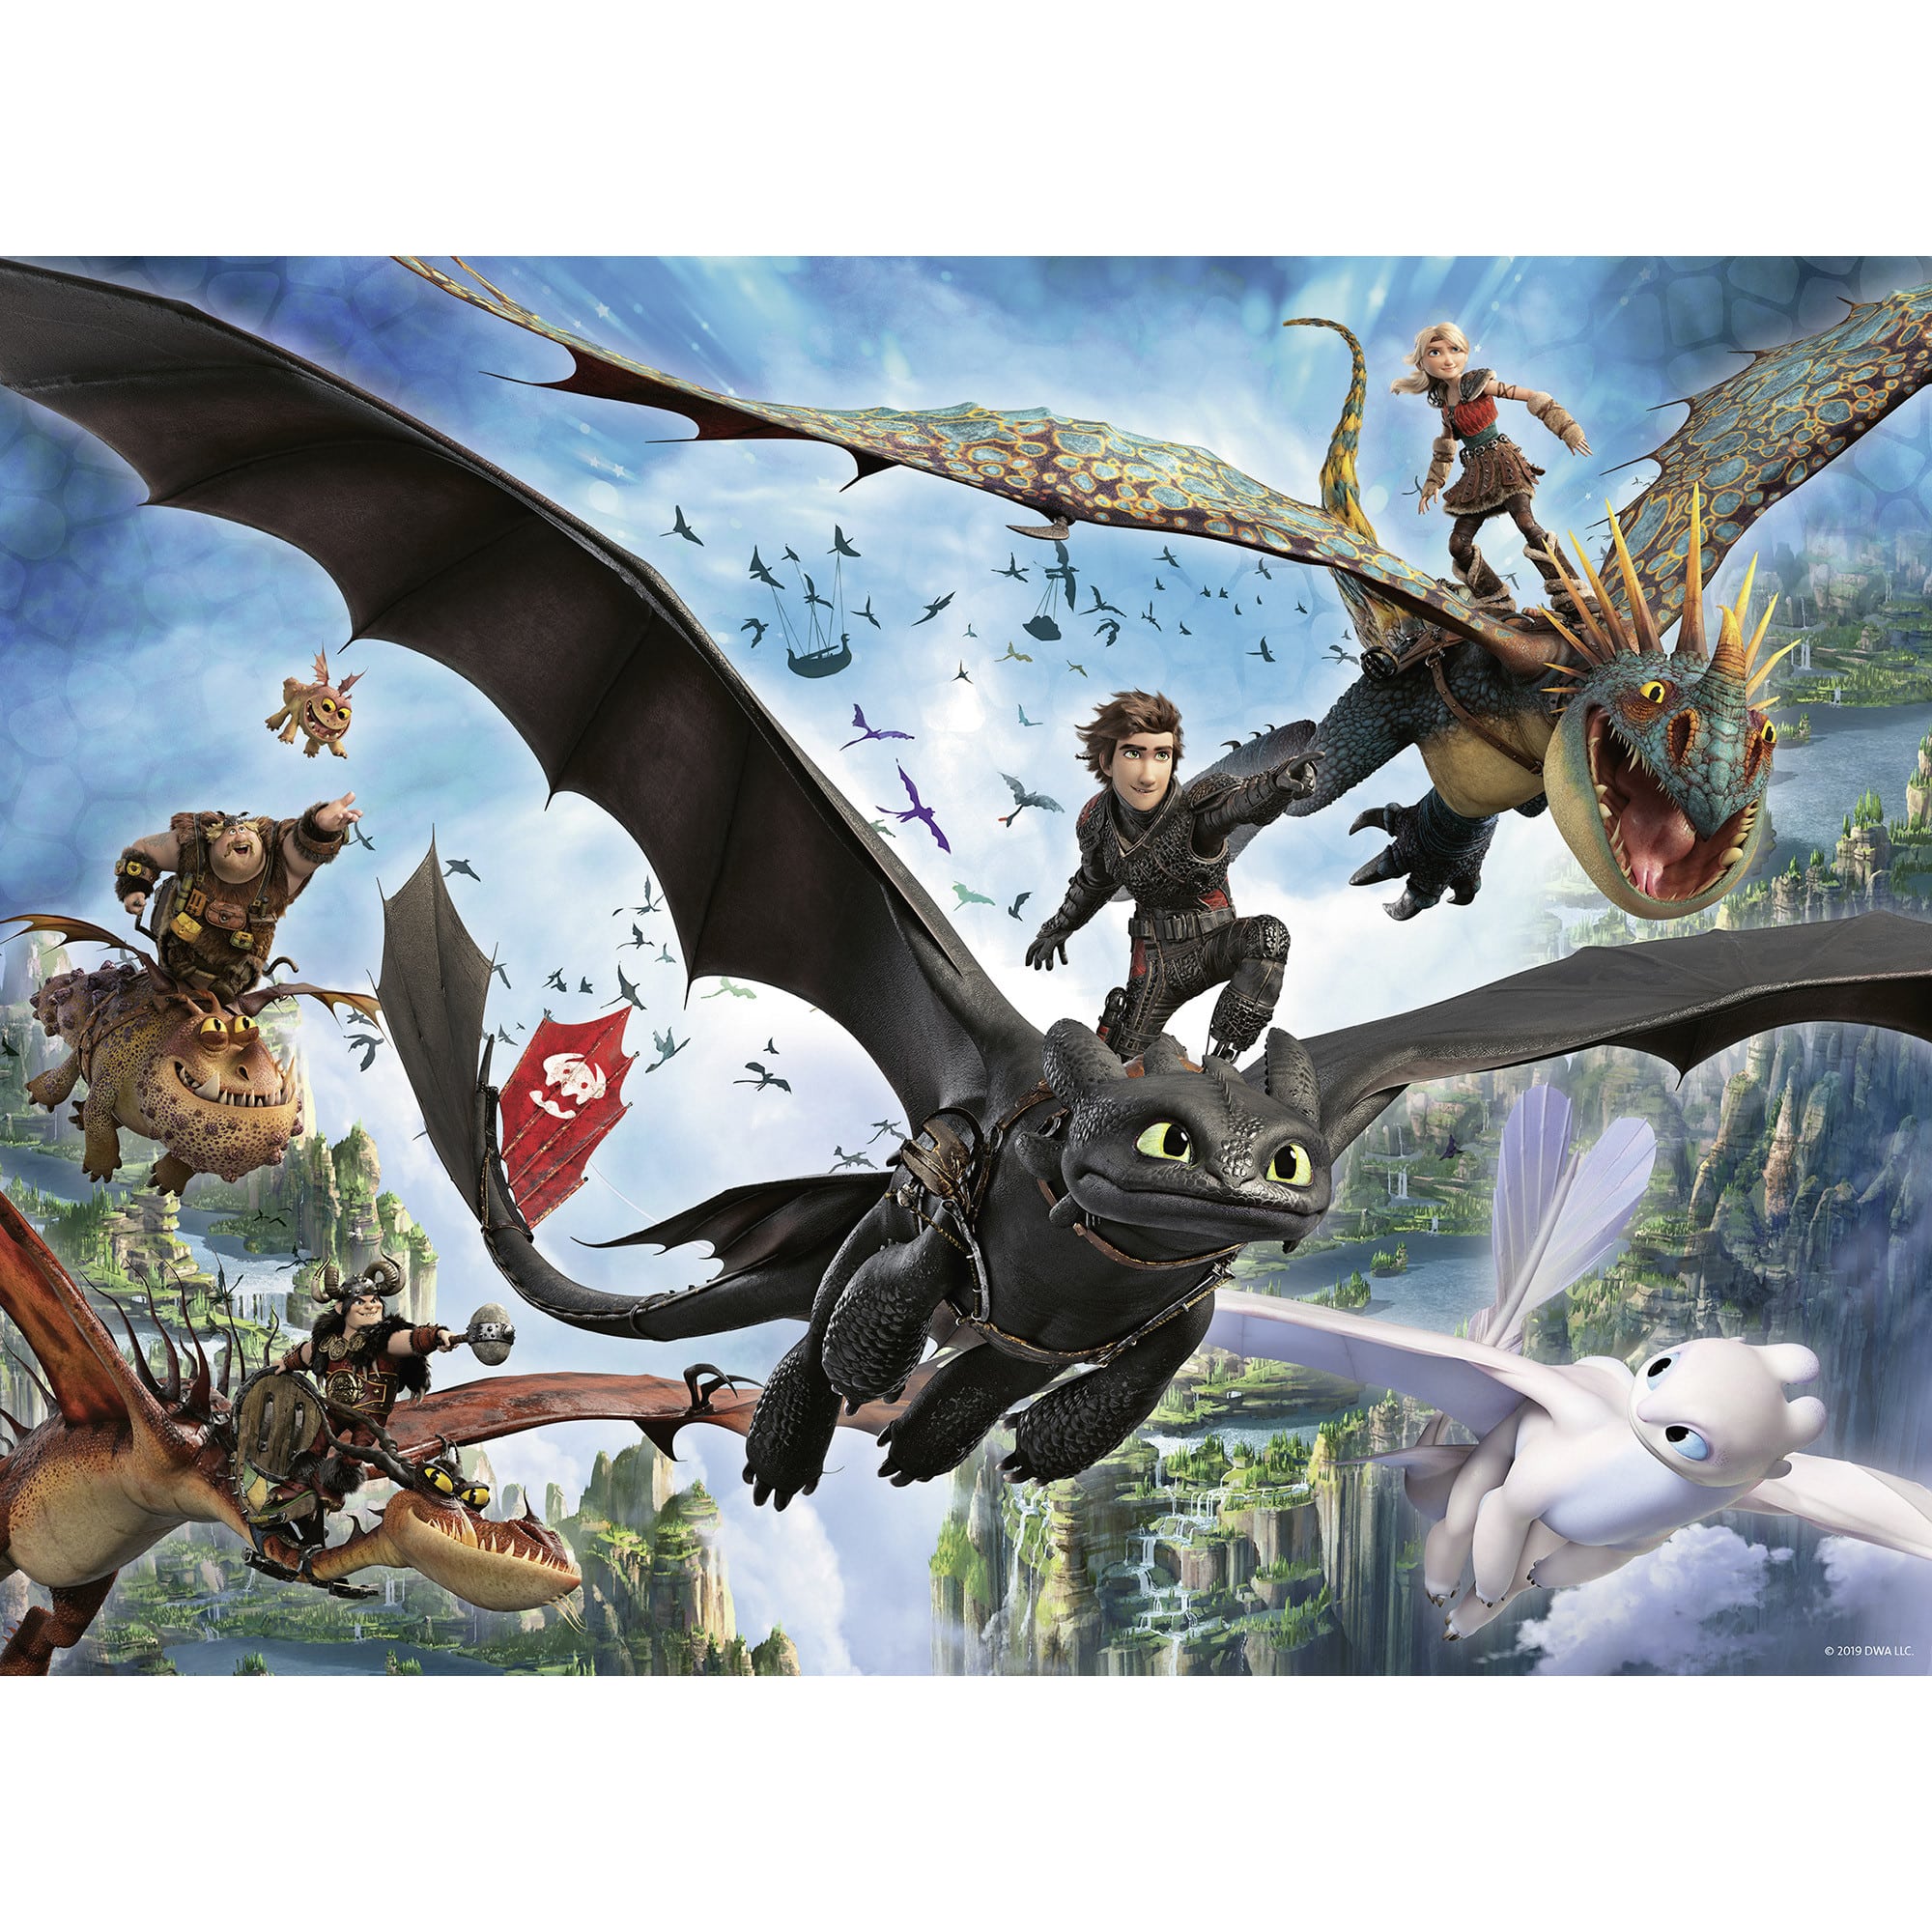 Ravensburger - How To Train Your Dragon Puzzles - 100 Pieces